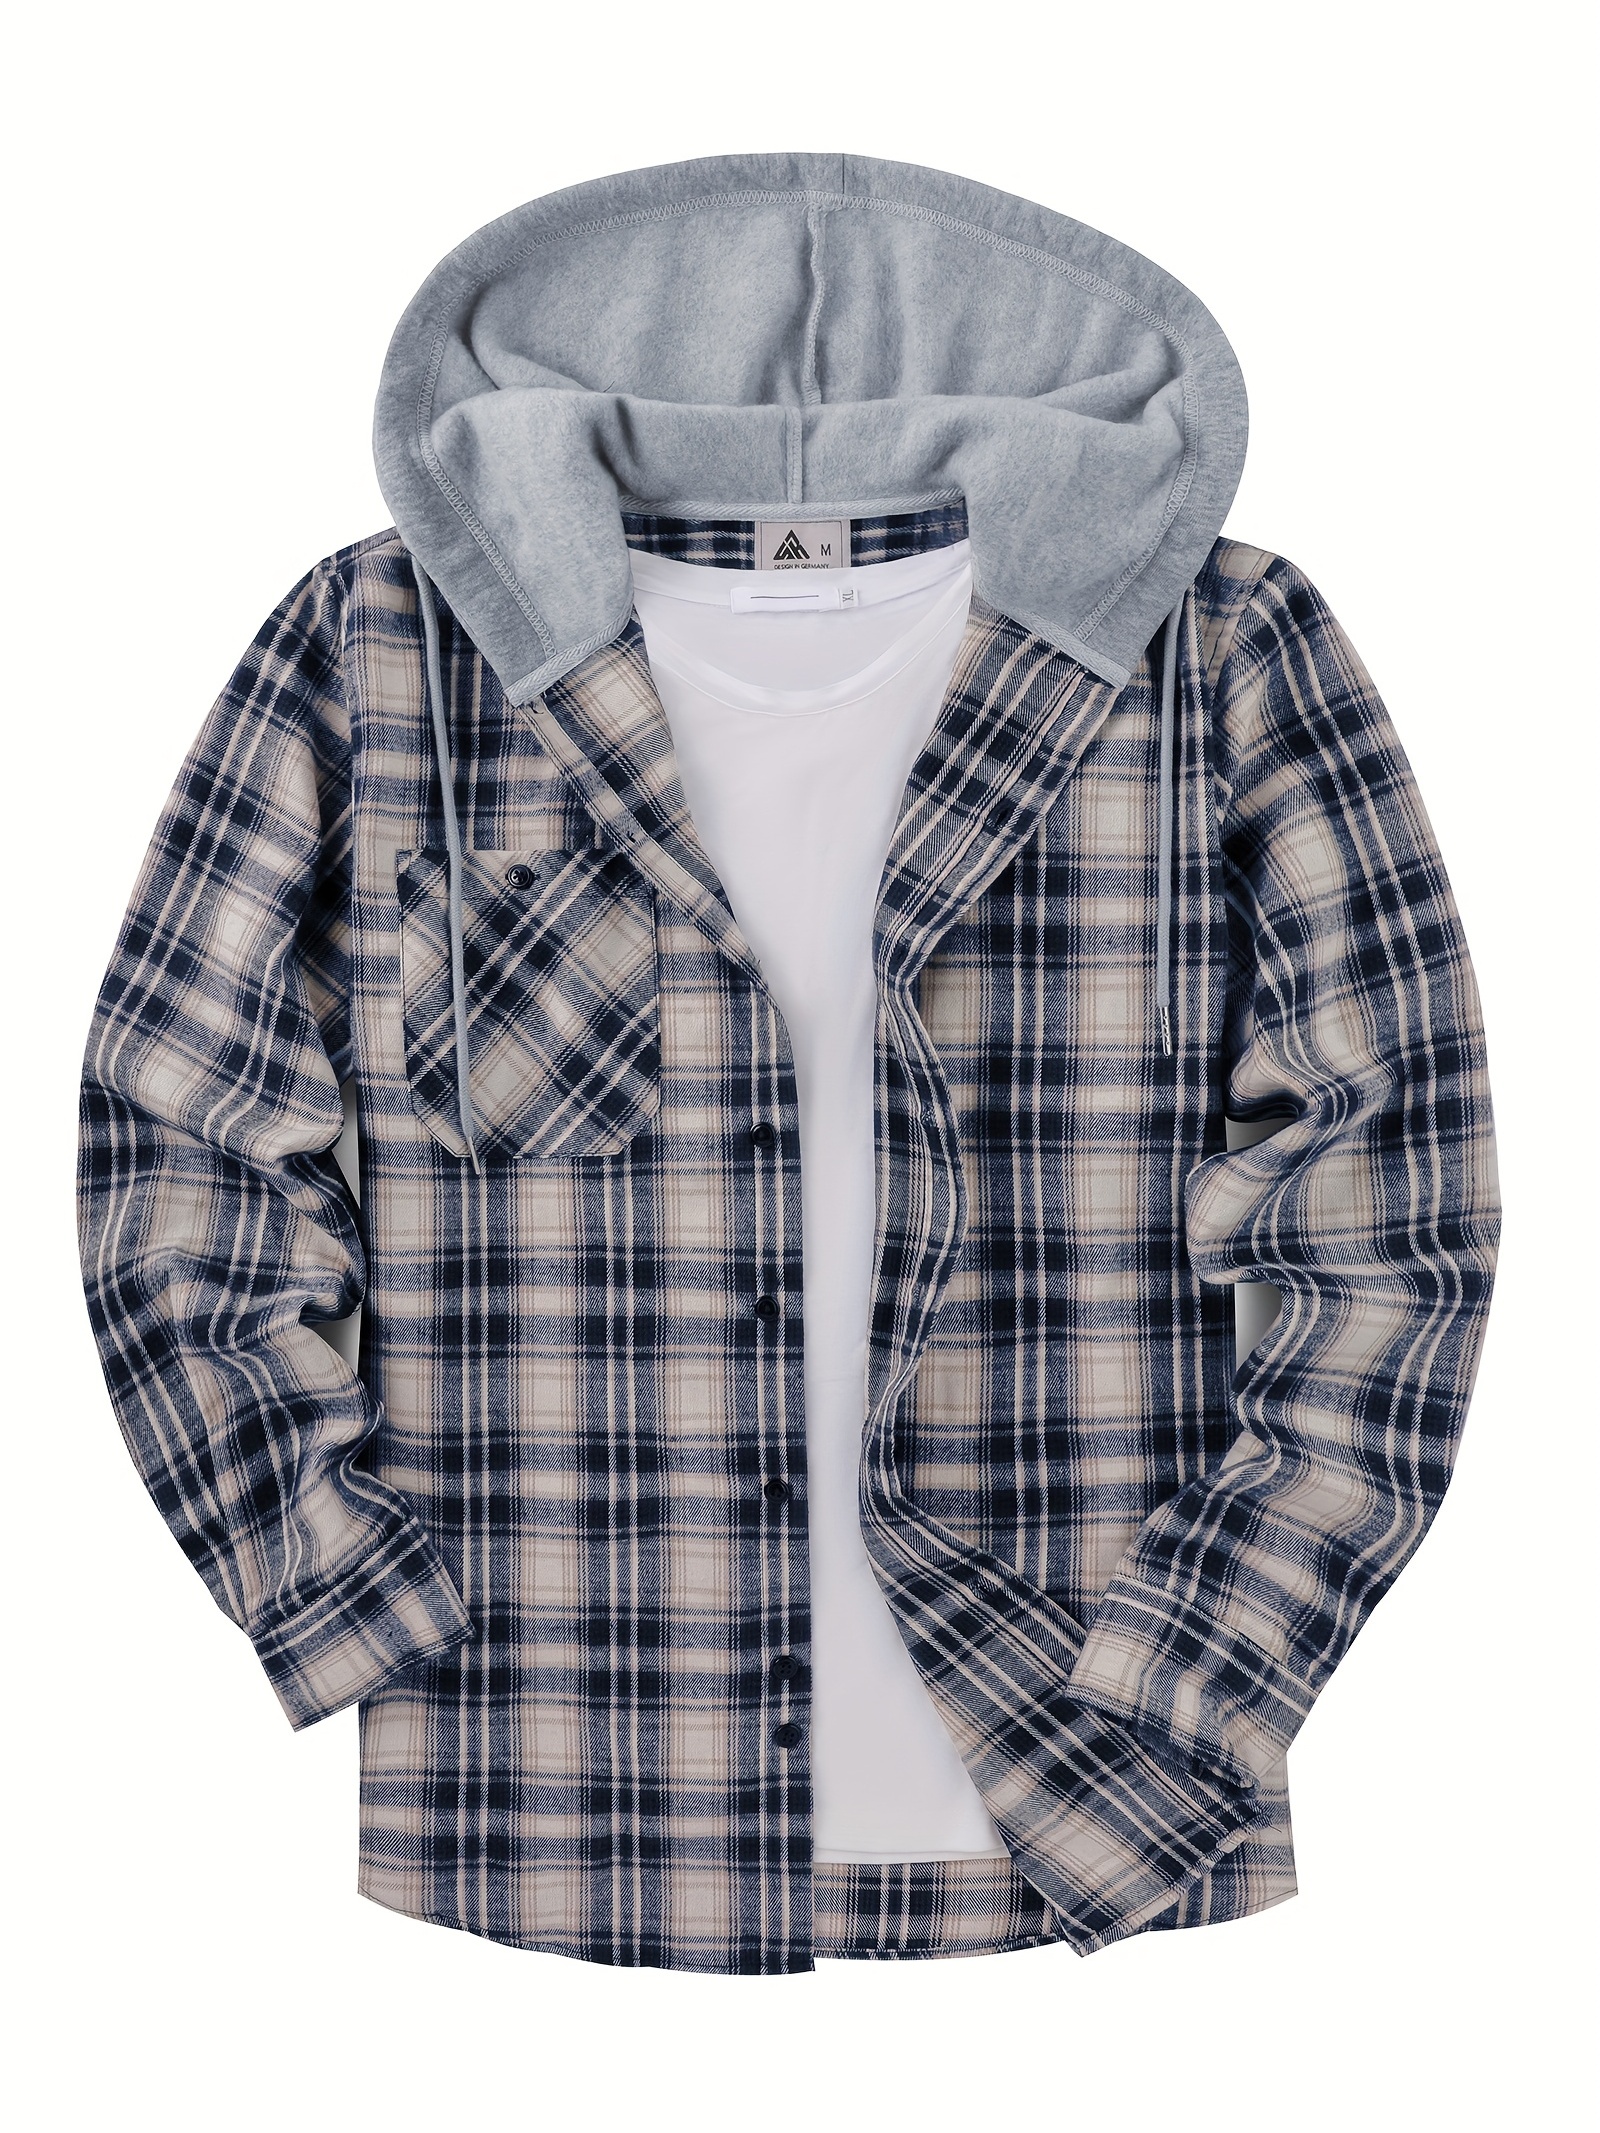 Plaid Shirt Coat for Men Long Sleeve Casual Regular Fit Button Up Hooded Shirts Jacket,L,$23.89,Sea Blue,Temu